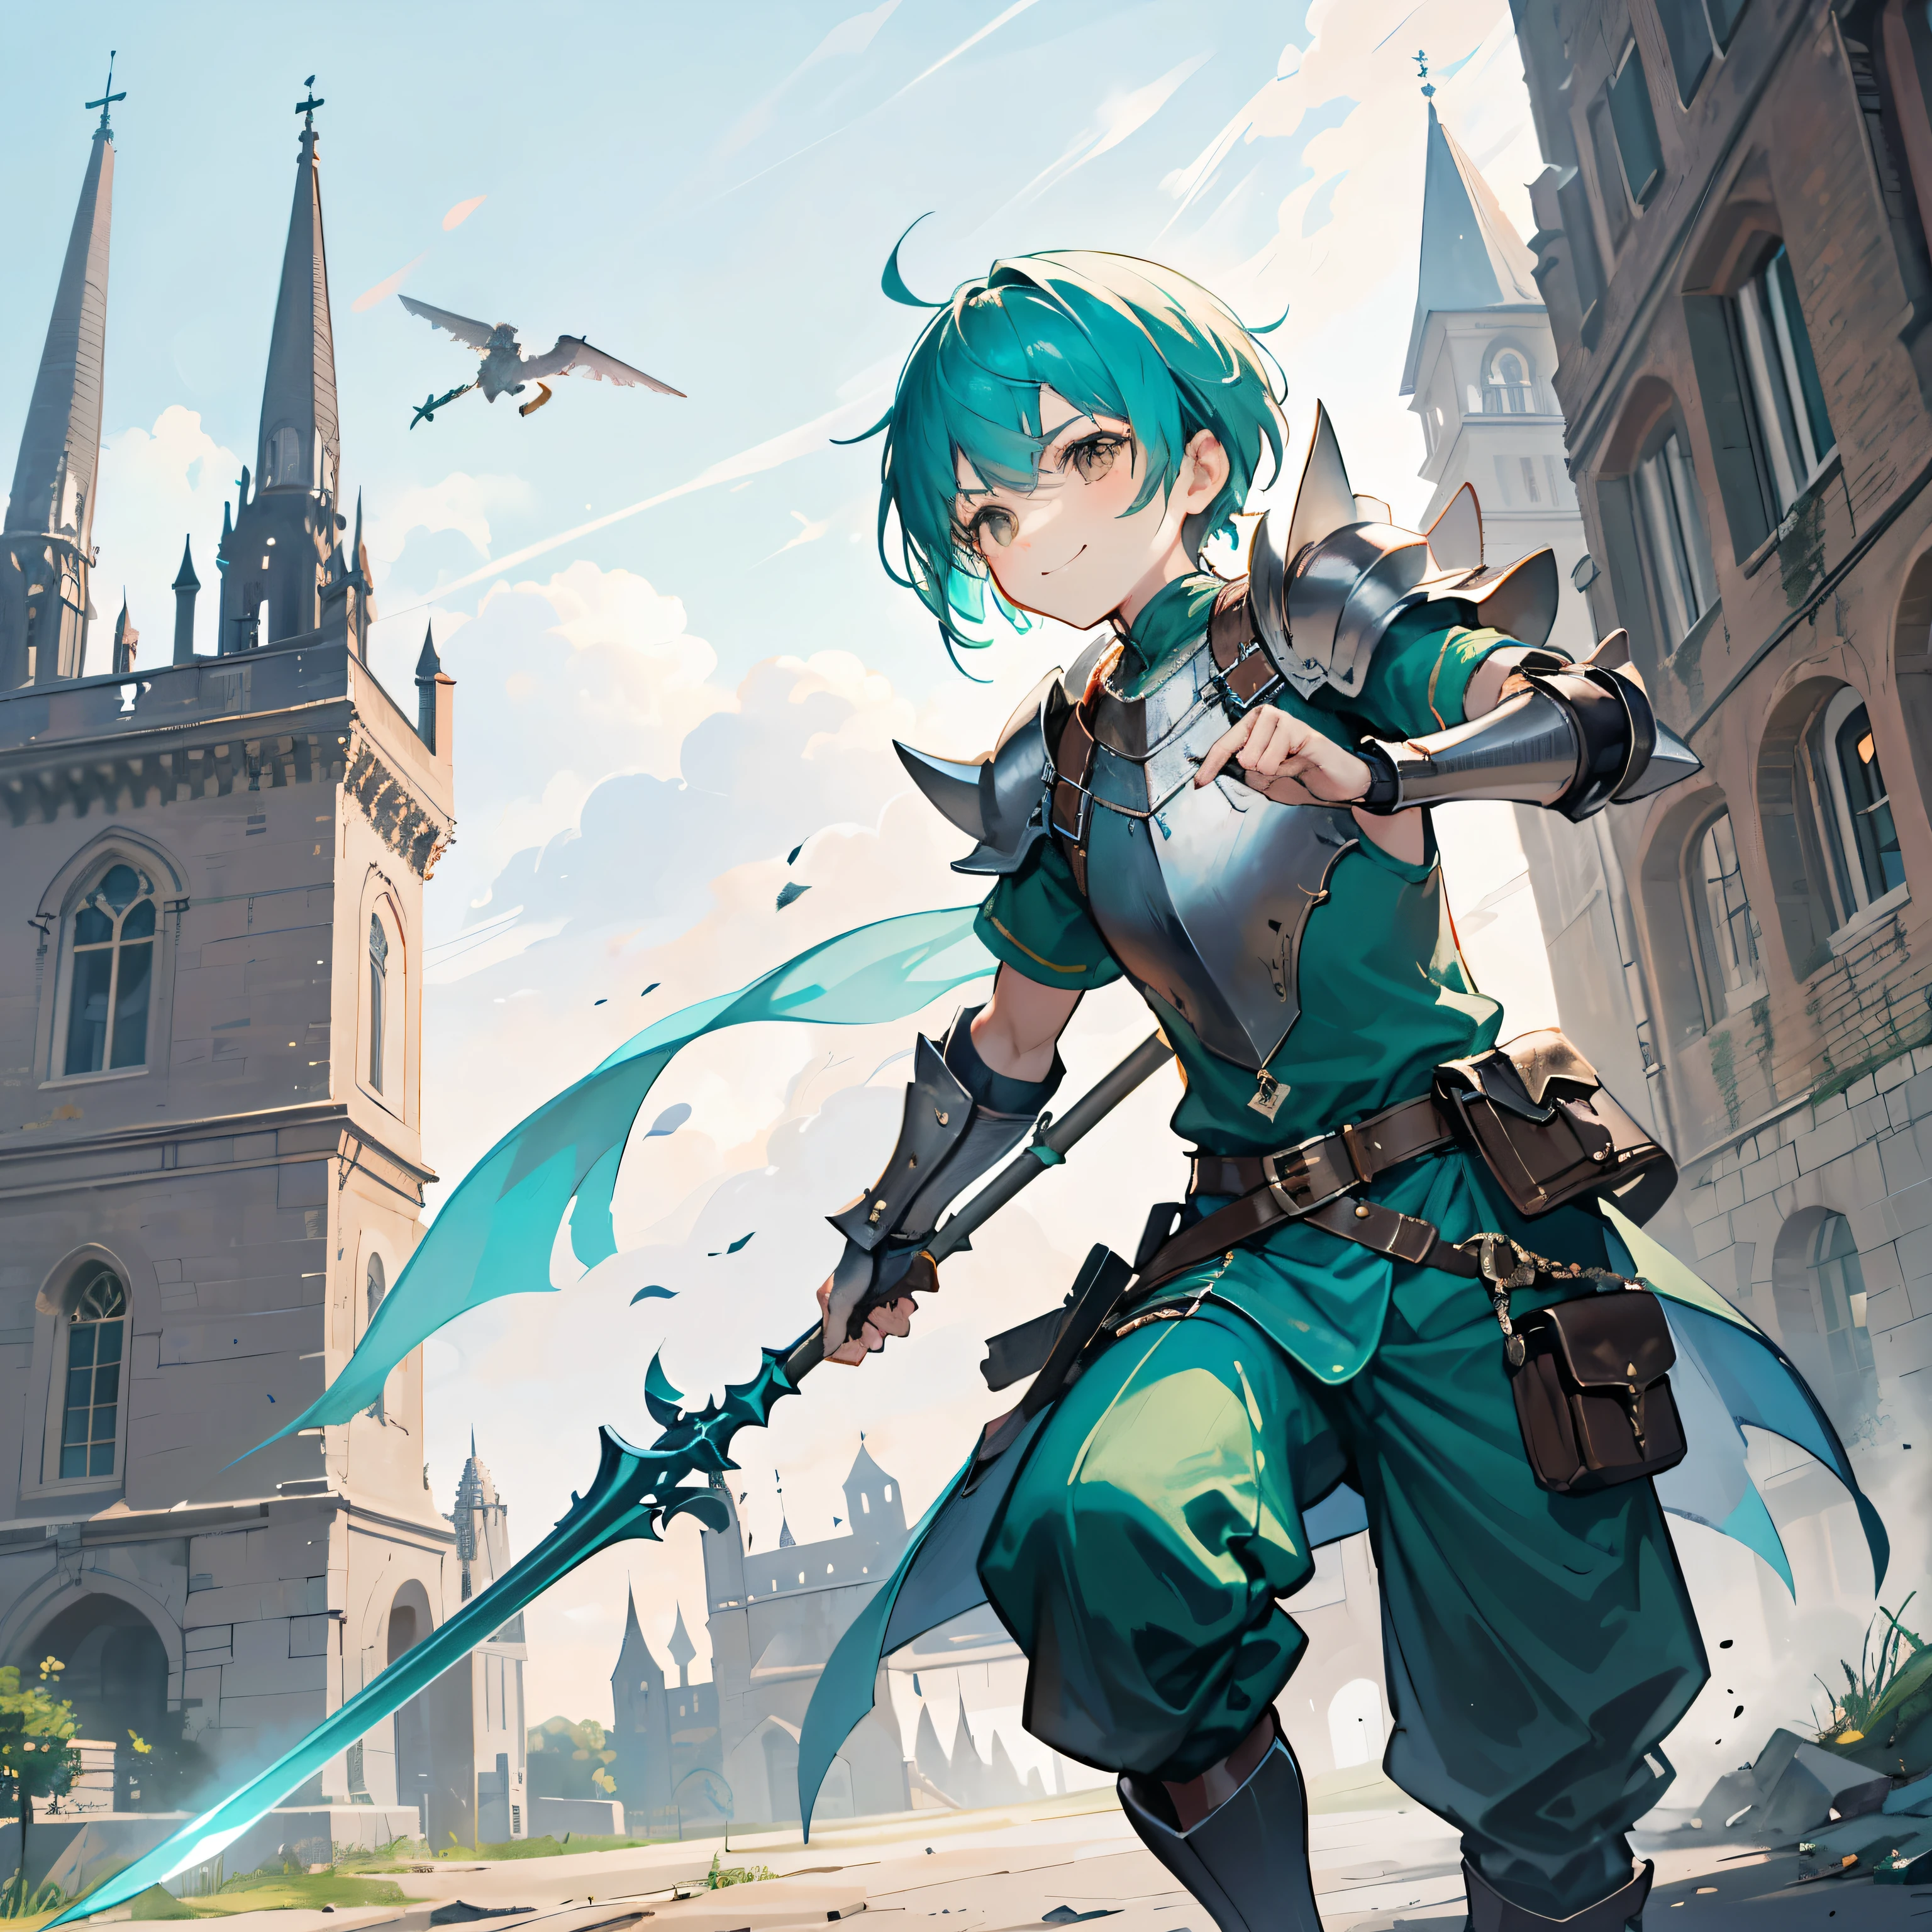 Front view, dynamic angle, 1 boy, young boy, kid spearman, kid lancer, short hair, spiky hair, spiky hair, turquoise hair, turquoise hair, brown eyes, cute, confident, cocky, smile, green outfit, a few armor pieces, 1 shoulder plate, shoulder plate and gauntlet in his left arm, armor headpiece, minimal chest plate, no lower body armor, lance, halberd, spear, holding a spear, simple spear, simplistic spear, minimal wooden spear, wooden spear with a blade on the tip, action pose, dynamic pose, medieval setting, medieval city background, castle background, medieval castle background